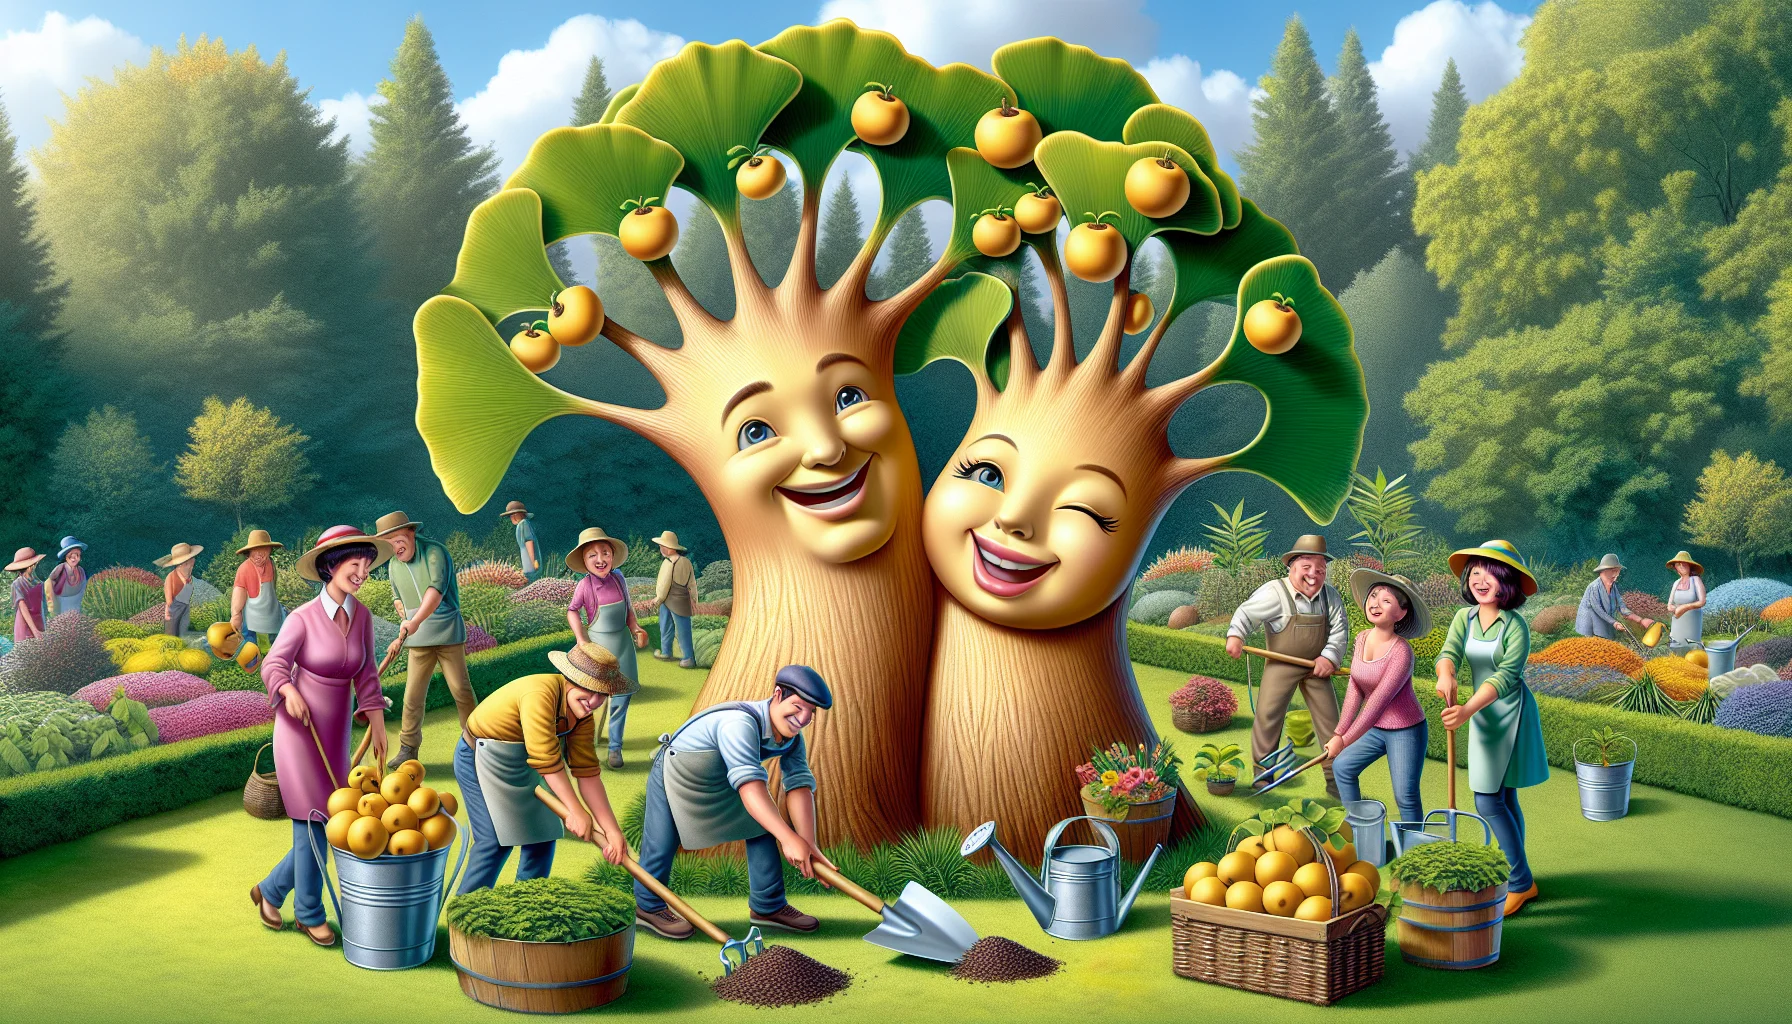 Create a whimsically realistic scene illustrating a male and female Ginkgo tree in a gardening setting. The male tree, broadly leafed and robust, sports a confident grin, while the female tree, laden with healthy fruit, playfully winks at the audience. They are anthropomorphized humorously, each exhibiting quirks while promoting the joy of gardening. Nature-loving onlookers of diverse descent and gender enthusiastically engage in tree care, adorning the scene with vibrant colors. Use an abundance of symbolic details to infuse the image with a sense of infectious excitement for horticulture.